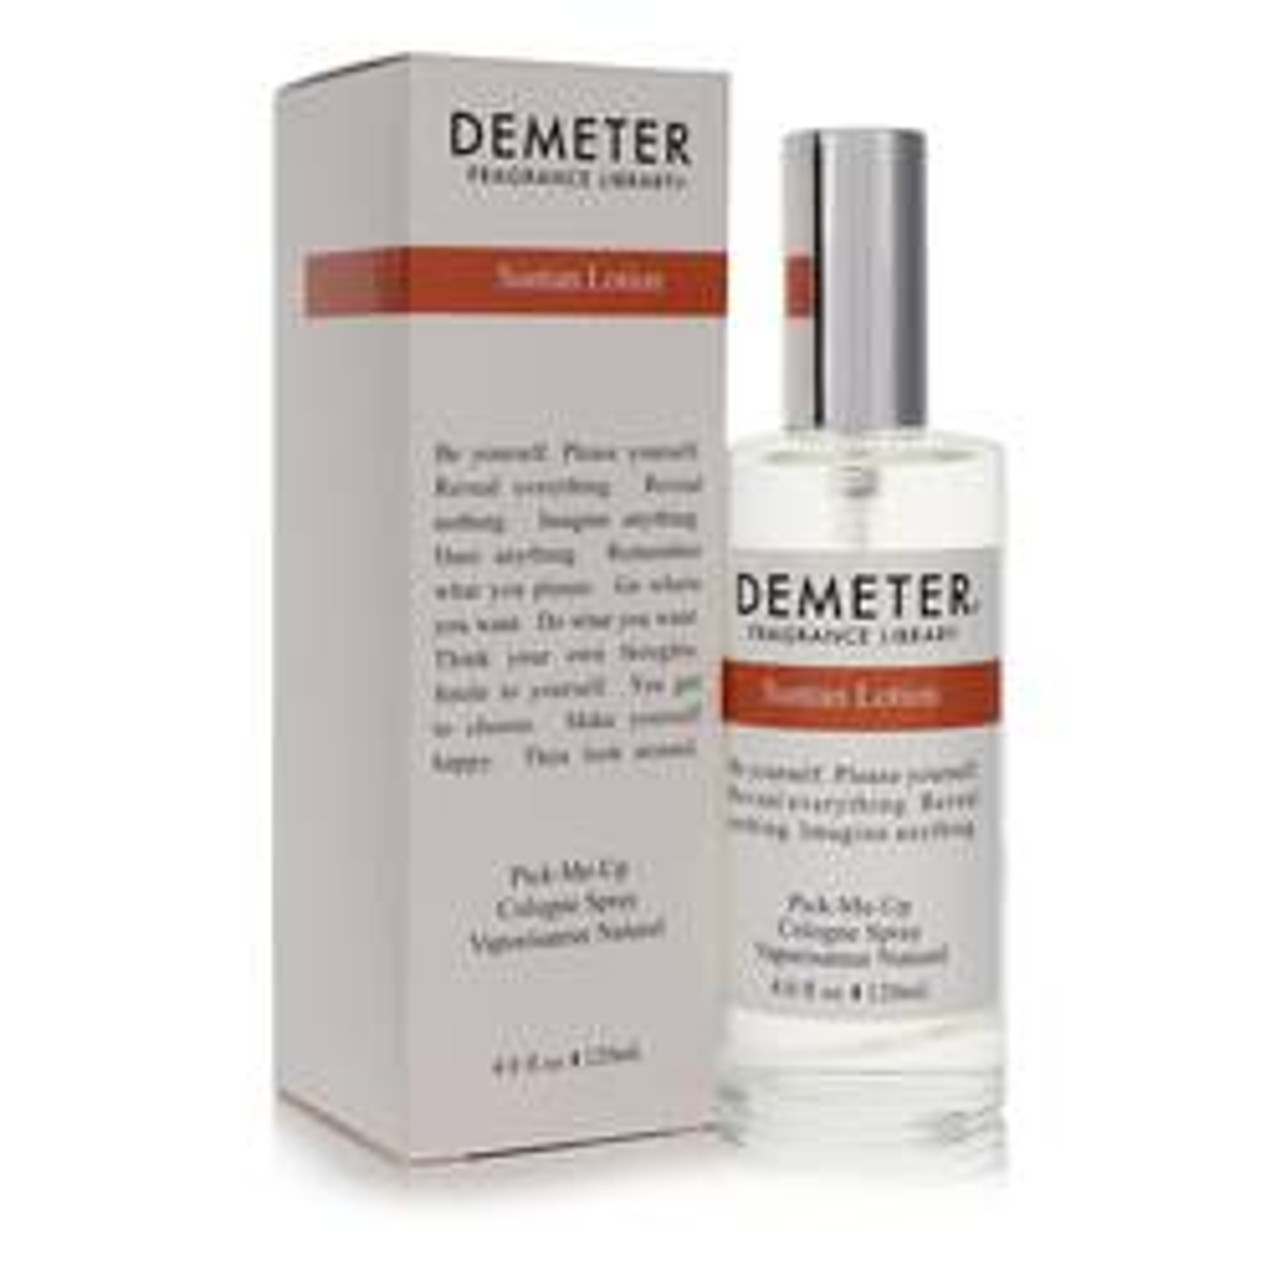 Demeter Suntan Lotion Perfume By Demeter Cologne Spray 4 oz for Women - [From 79.50 - Choose pk Qty ] - *Ships from Miami